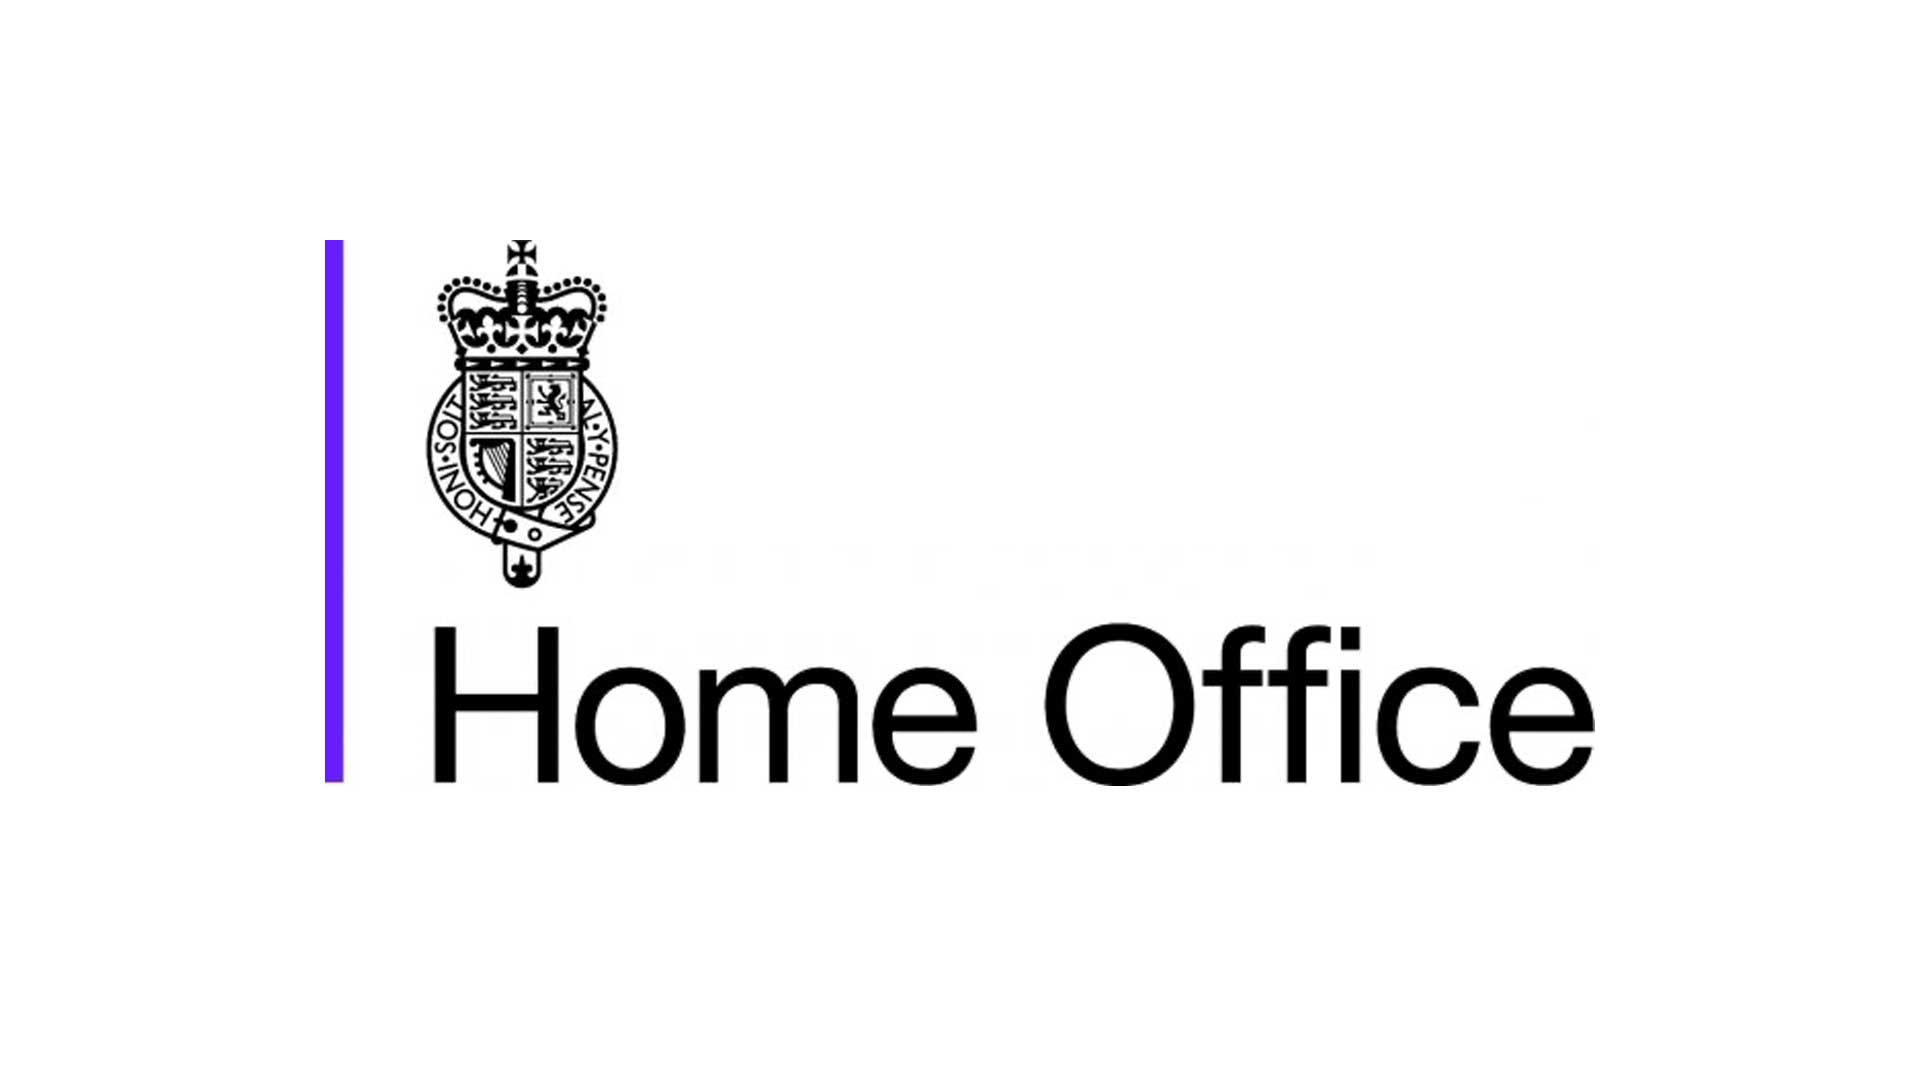 The home office logo